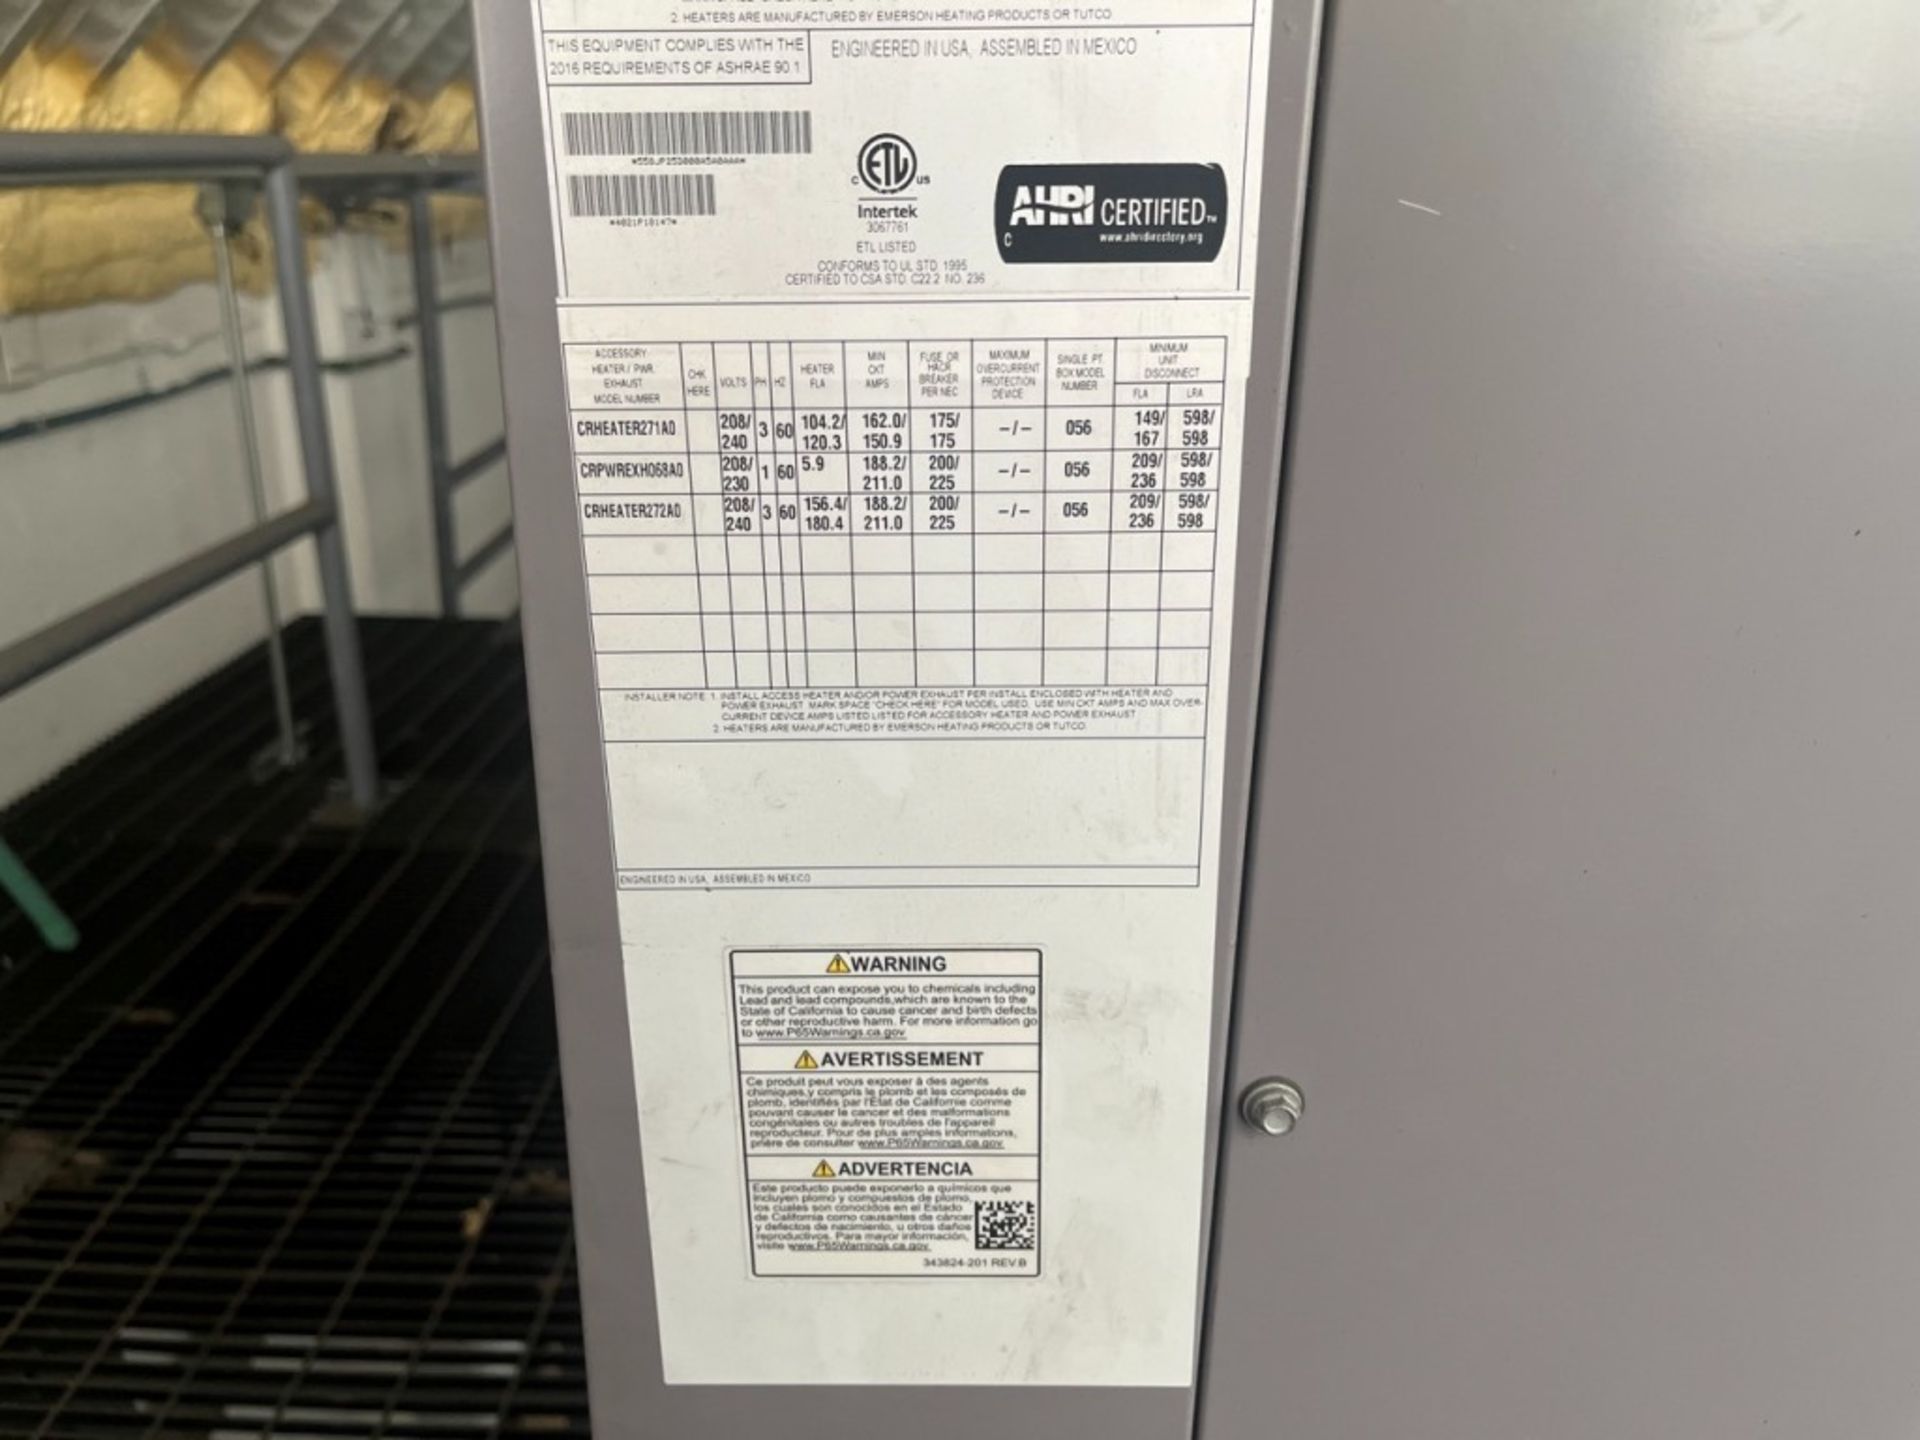 (NEW) Bryant Unit Package Air Model 558JP25D000A5A0AAAAA, Serial No. 4021P18147; Includes ductwork - Image 20 of 26